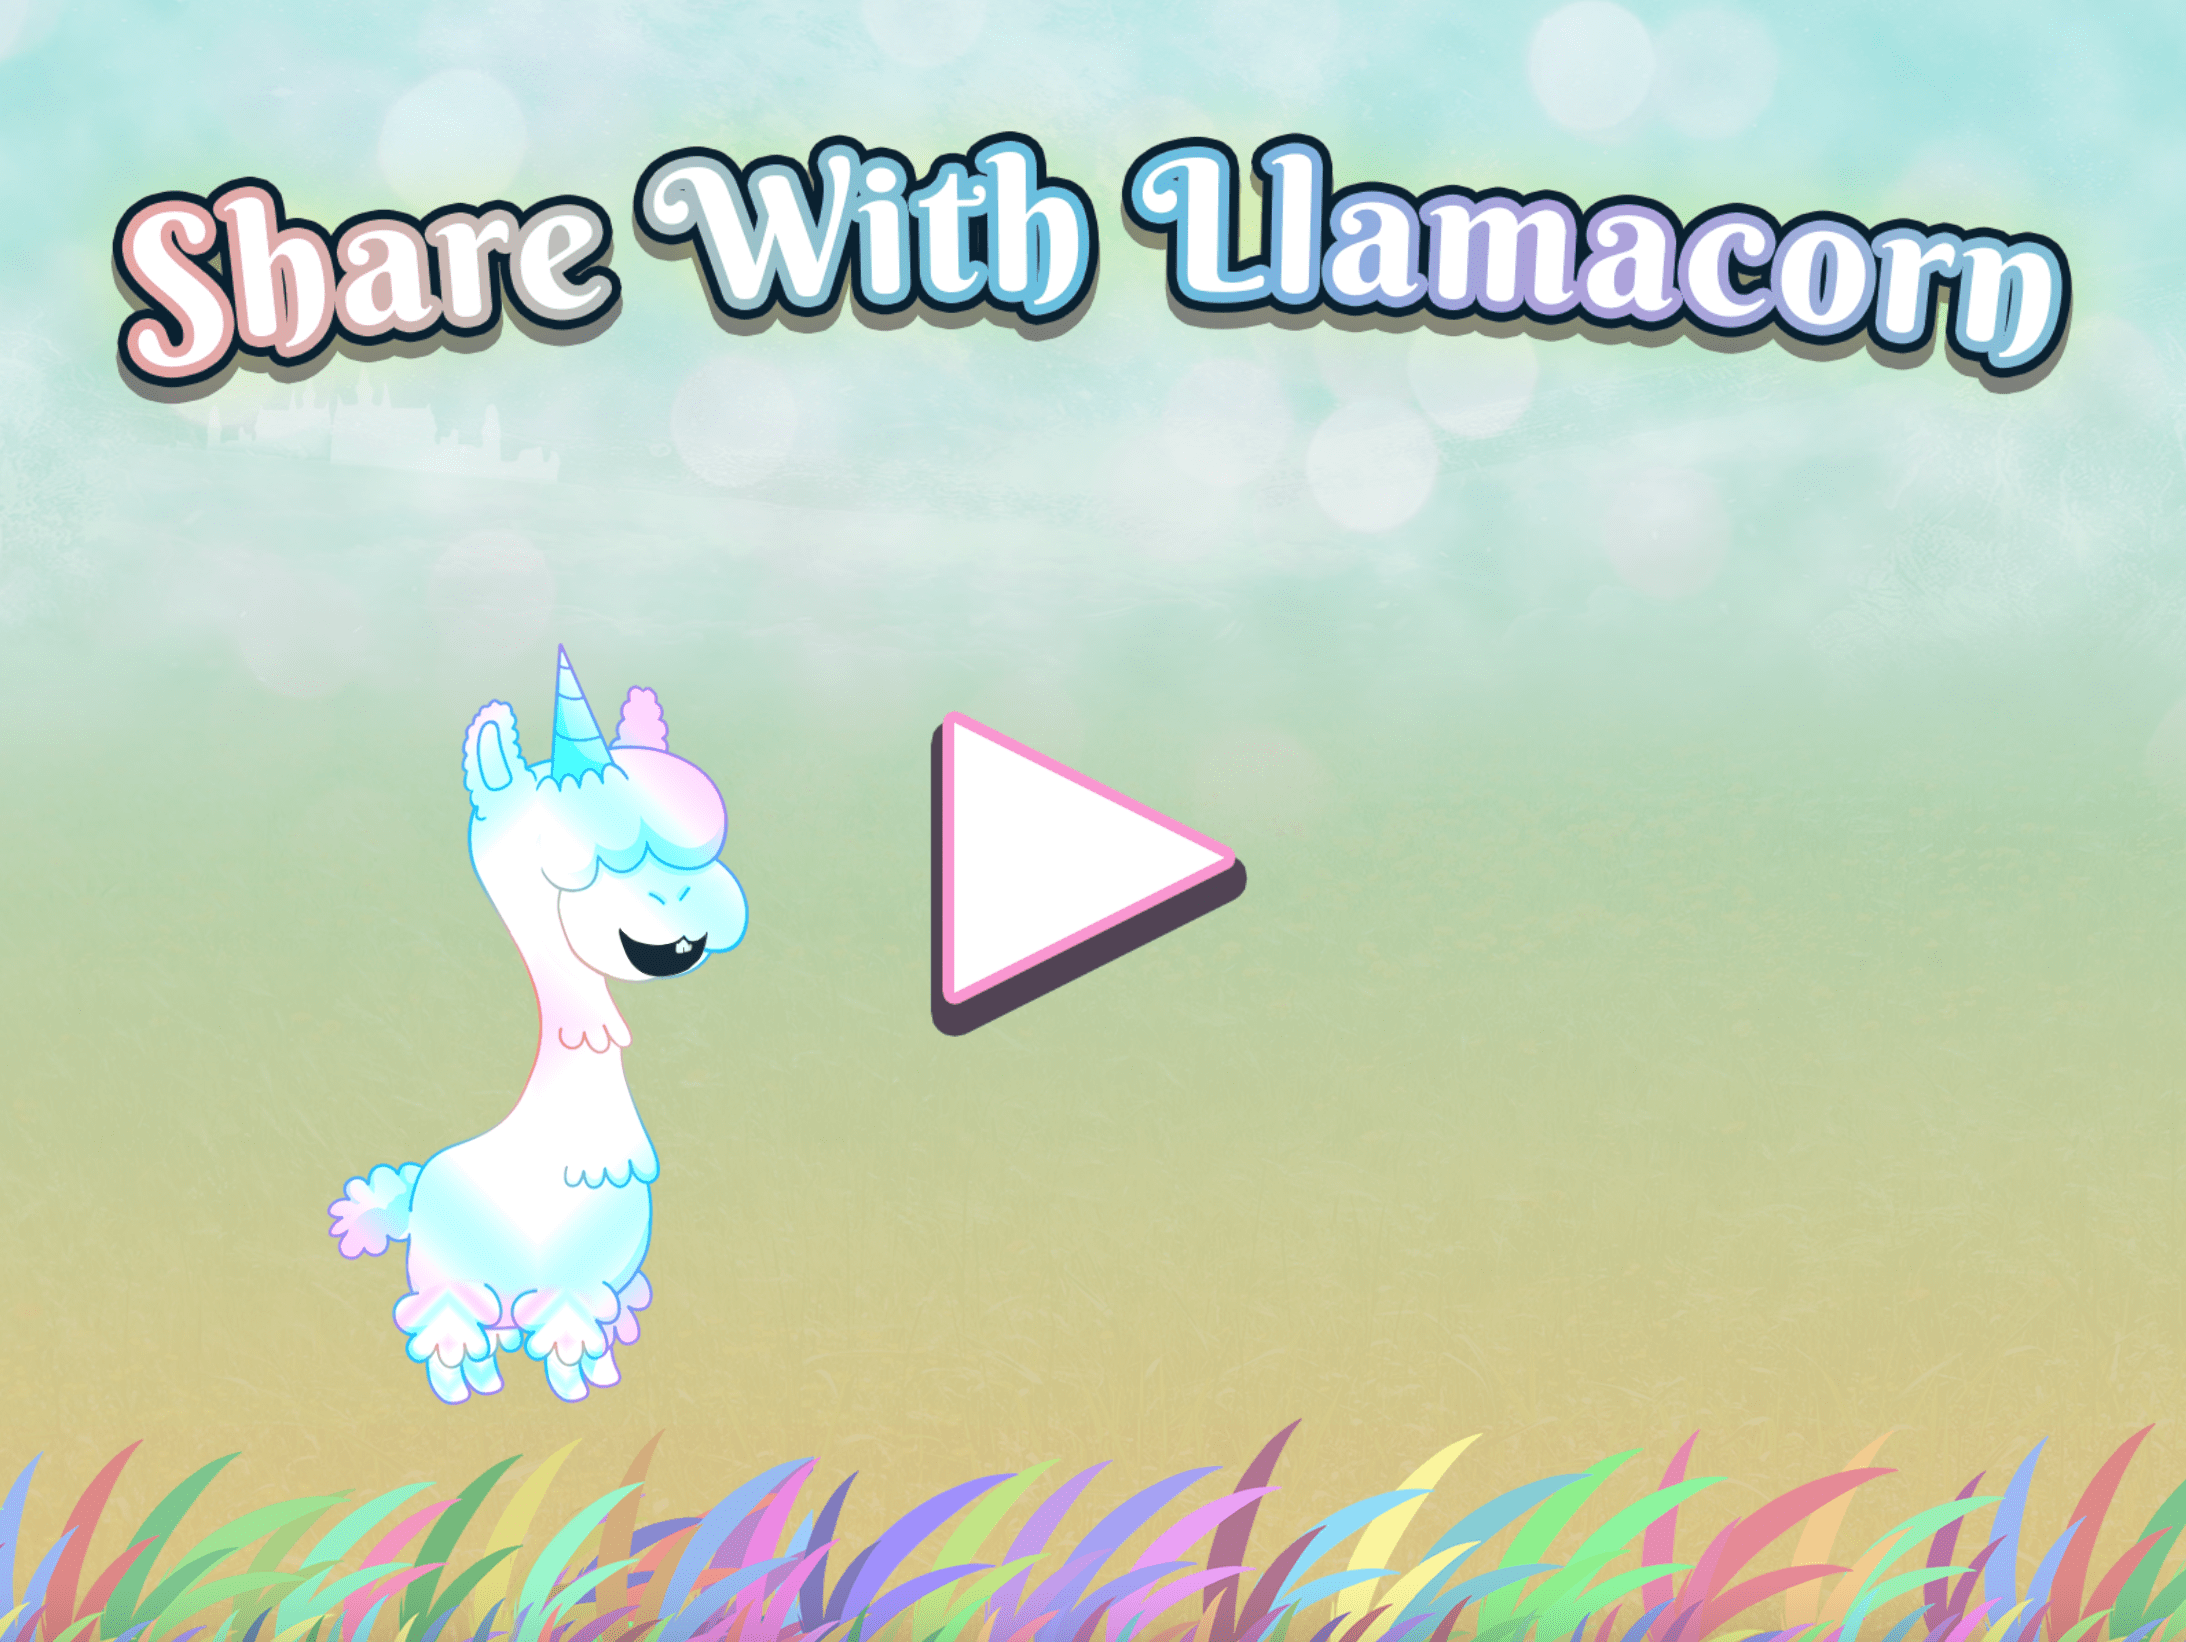 Share with Llamacorn game